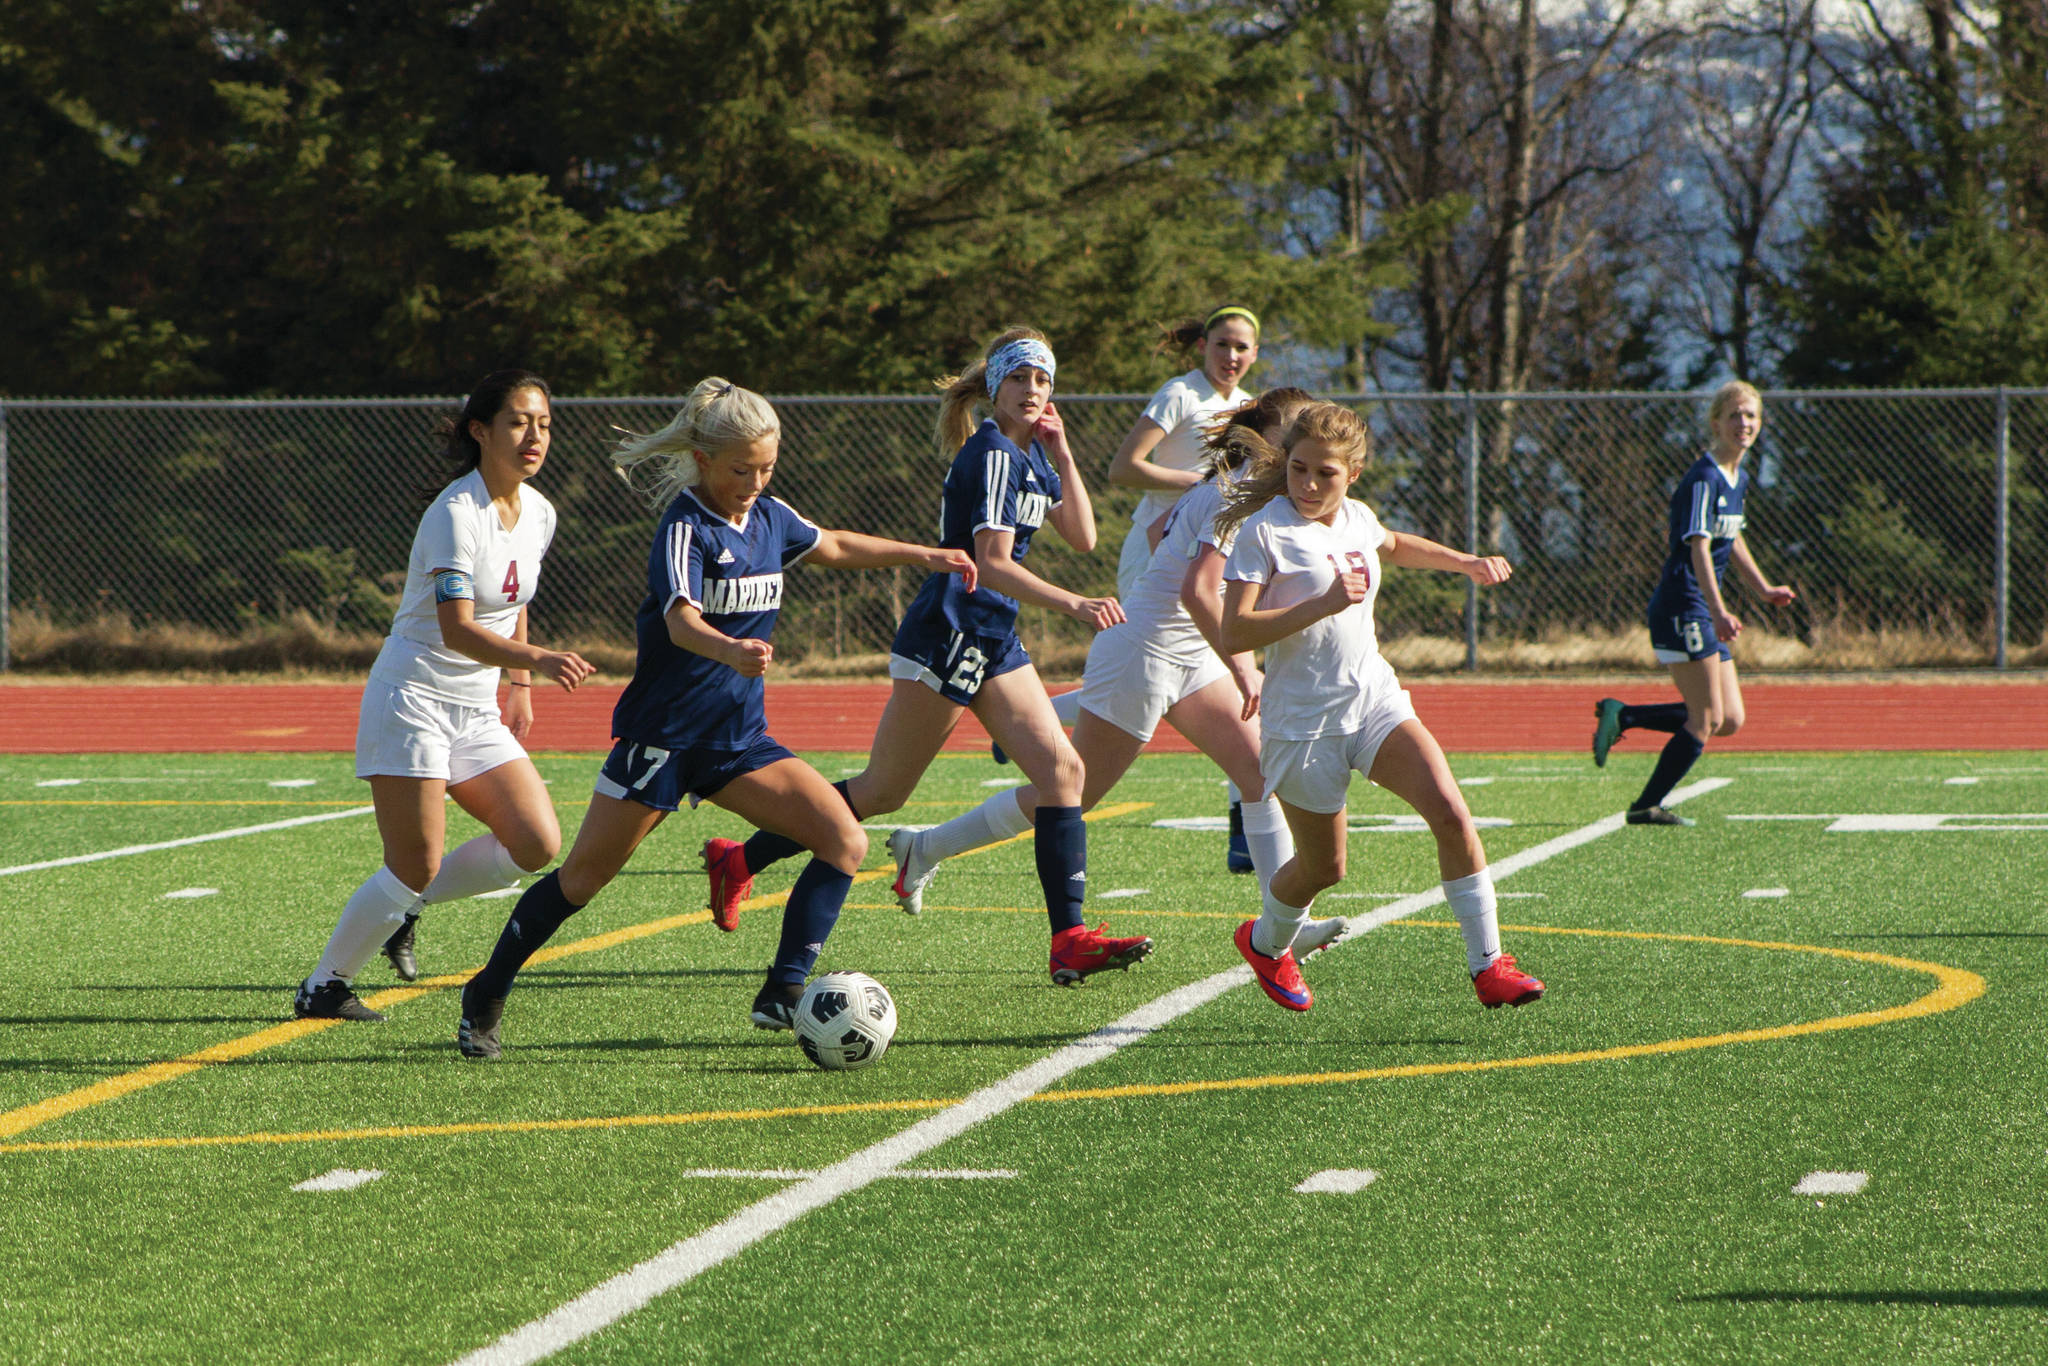 Lady Mariner’s Sela Weisser manuevers her way down field during the Homer girls vs. Grace Christian School soccer game April 30, 2021, at the Homer High School soccer field. (Photo by Sarah Knapp/Homer News)